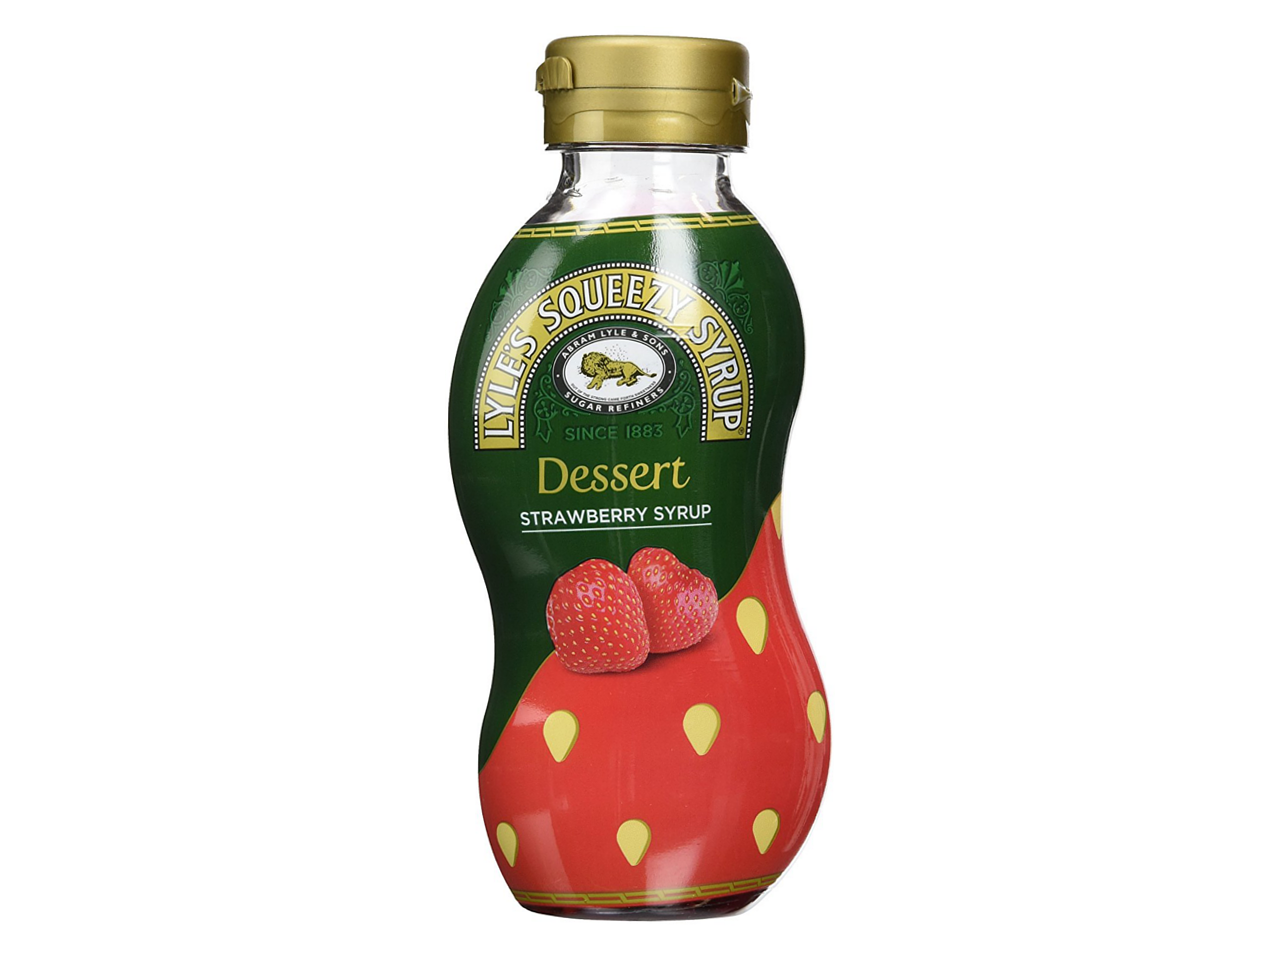 Lyles Squeezy Syrup Dessert Strawberry Syrup 325g 